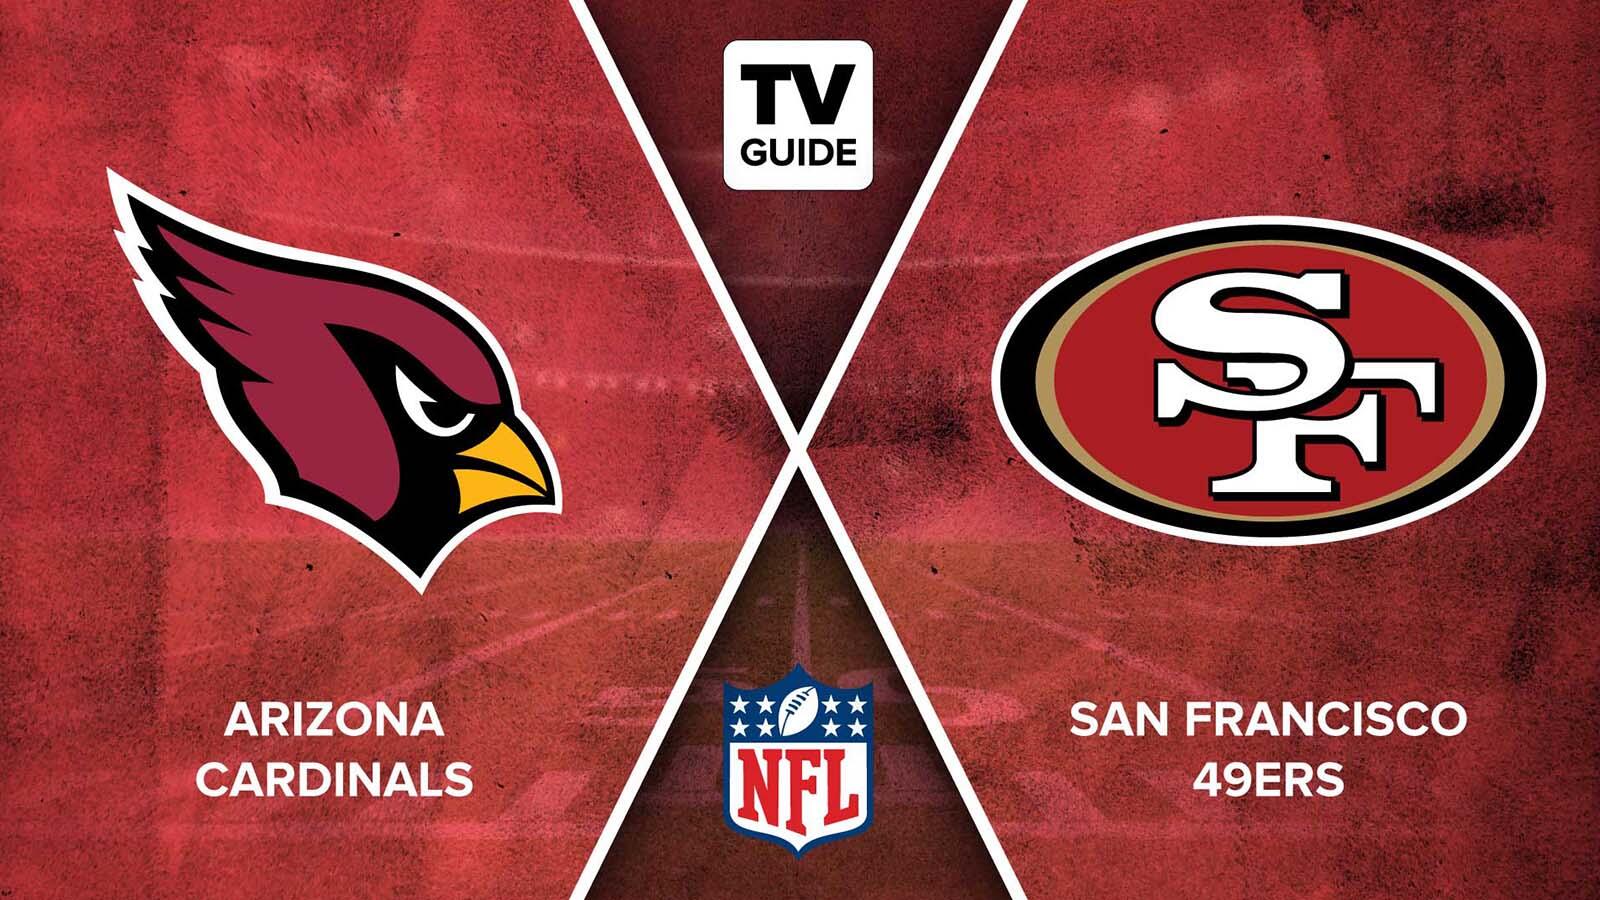 where can i watch the cardinals vs 49ers game